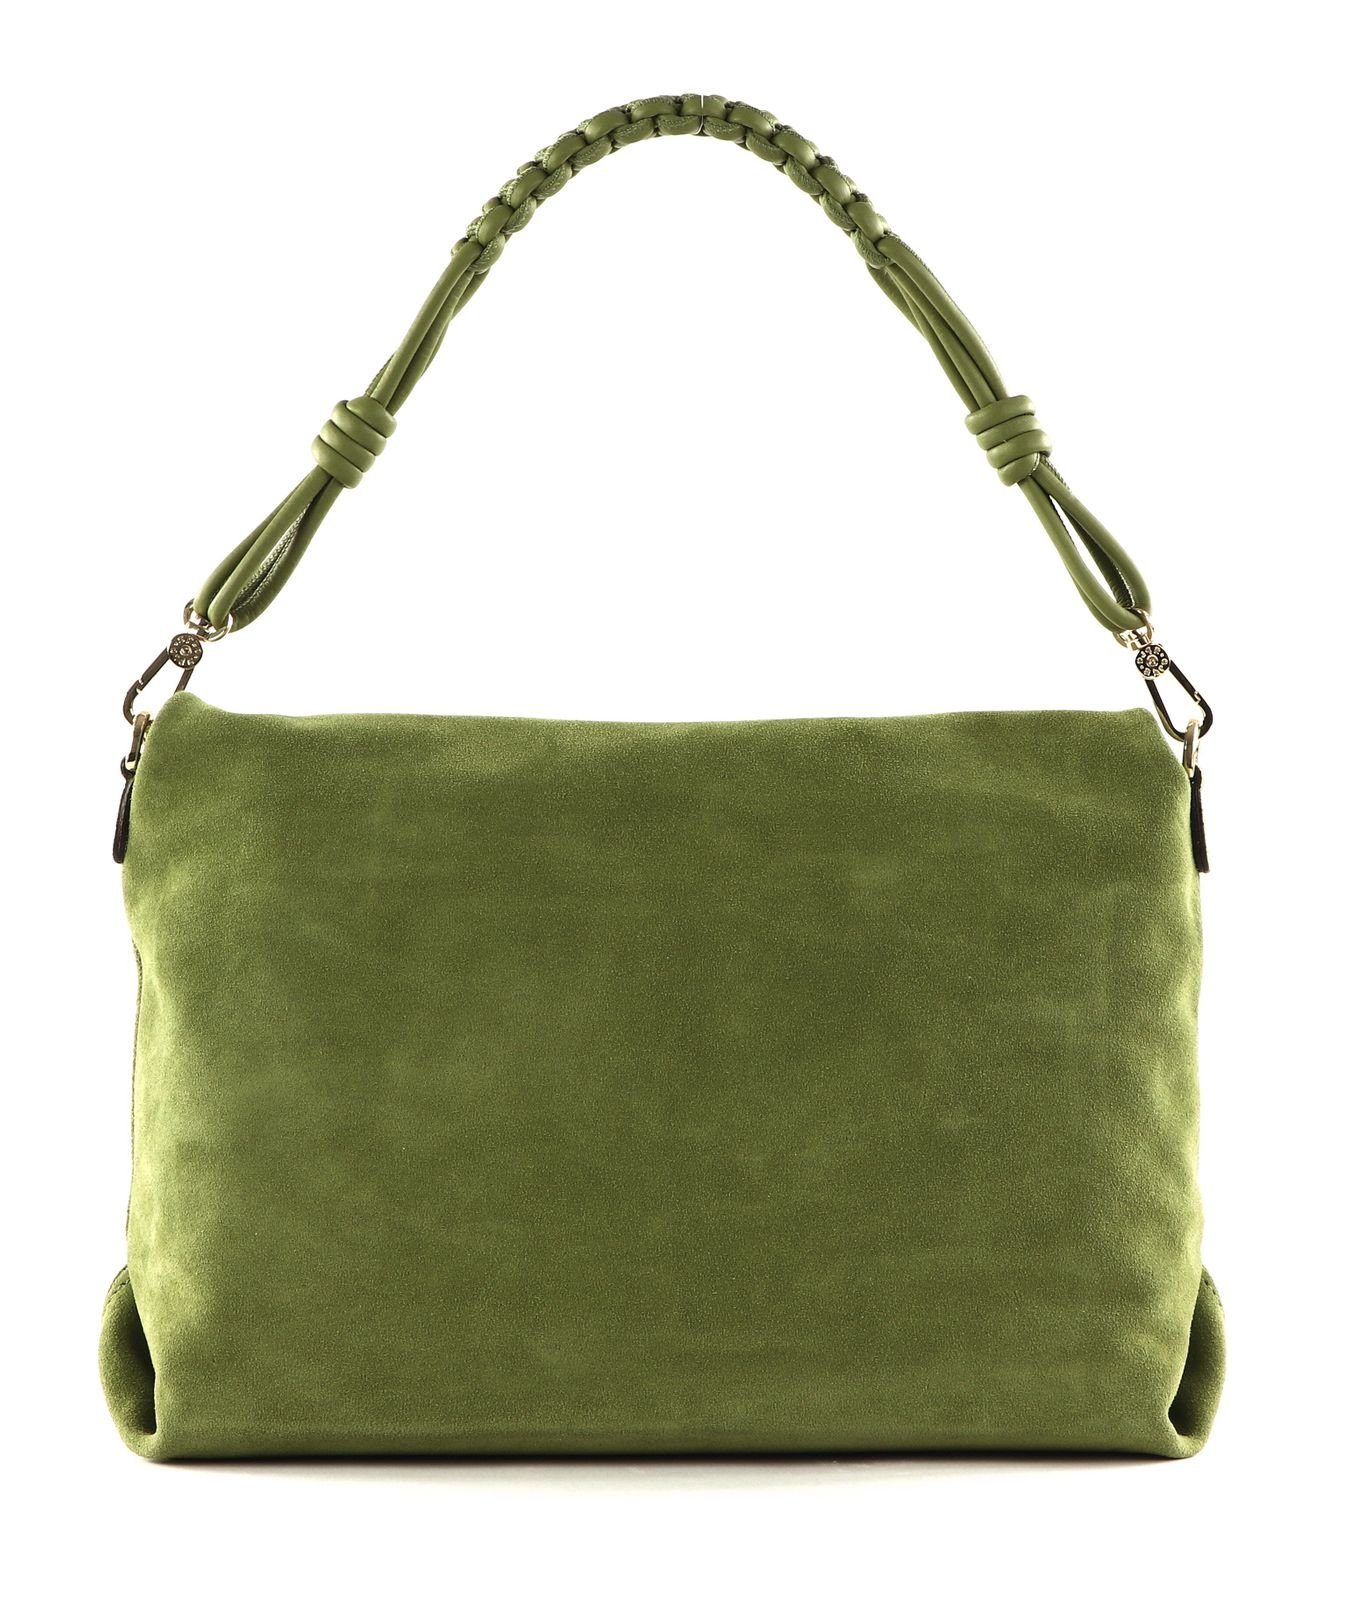 Oliv Abro Leather Schultertasche Suede